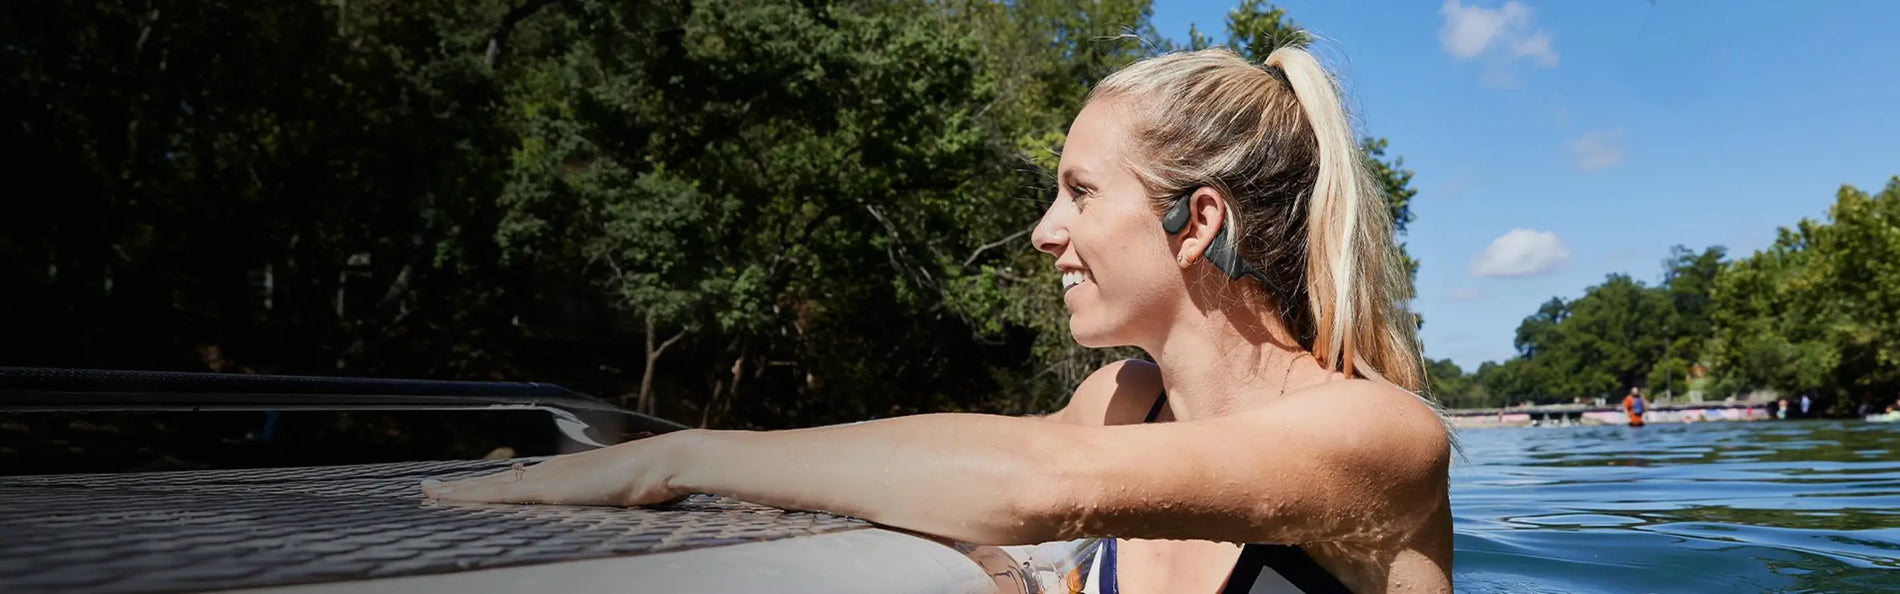 Open-Ear Comfort<br /><br /><br /><br /><br /><br /><br /><br /><br /> Our open-ear design powered by bone conduction technology ensures bud-free, comfortable listening all day, in or out of the water.